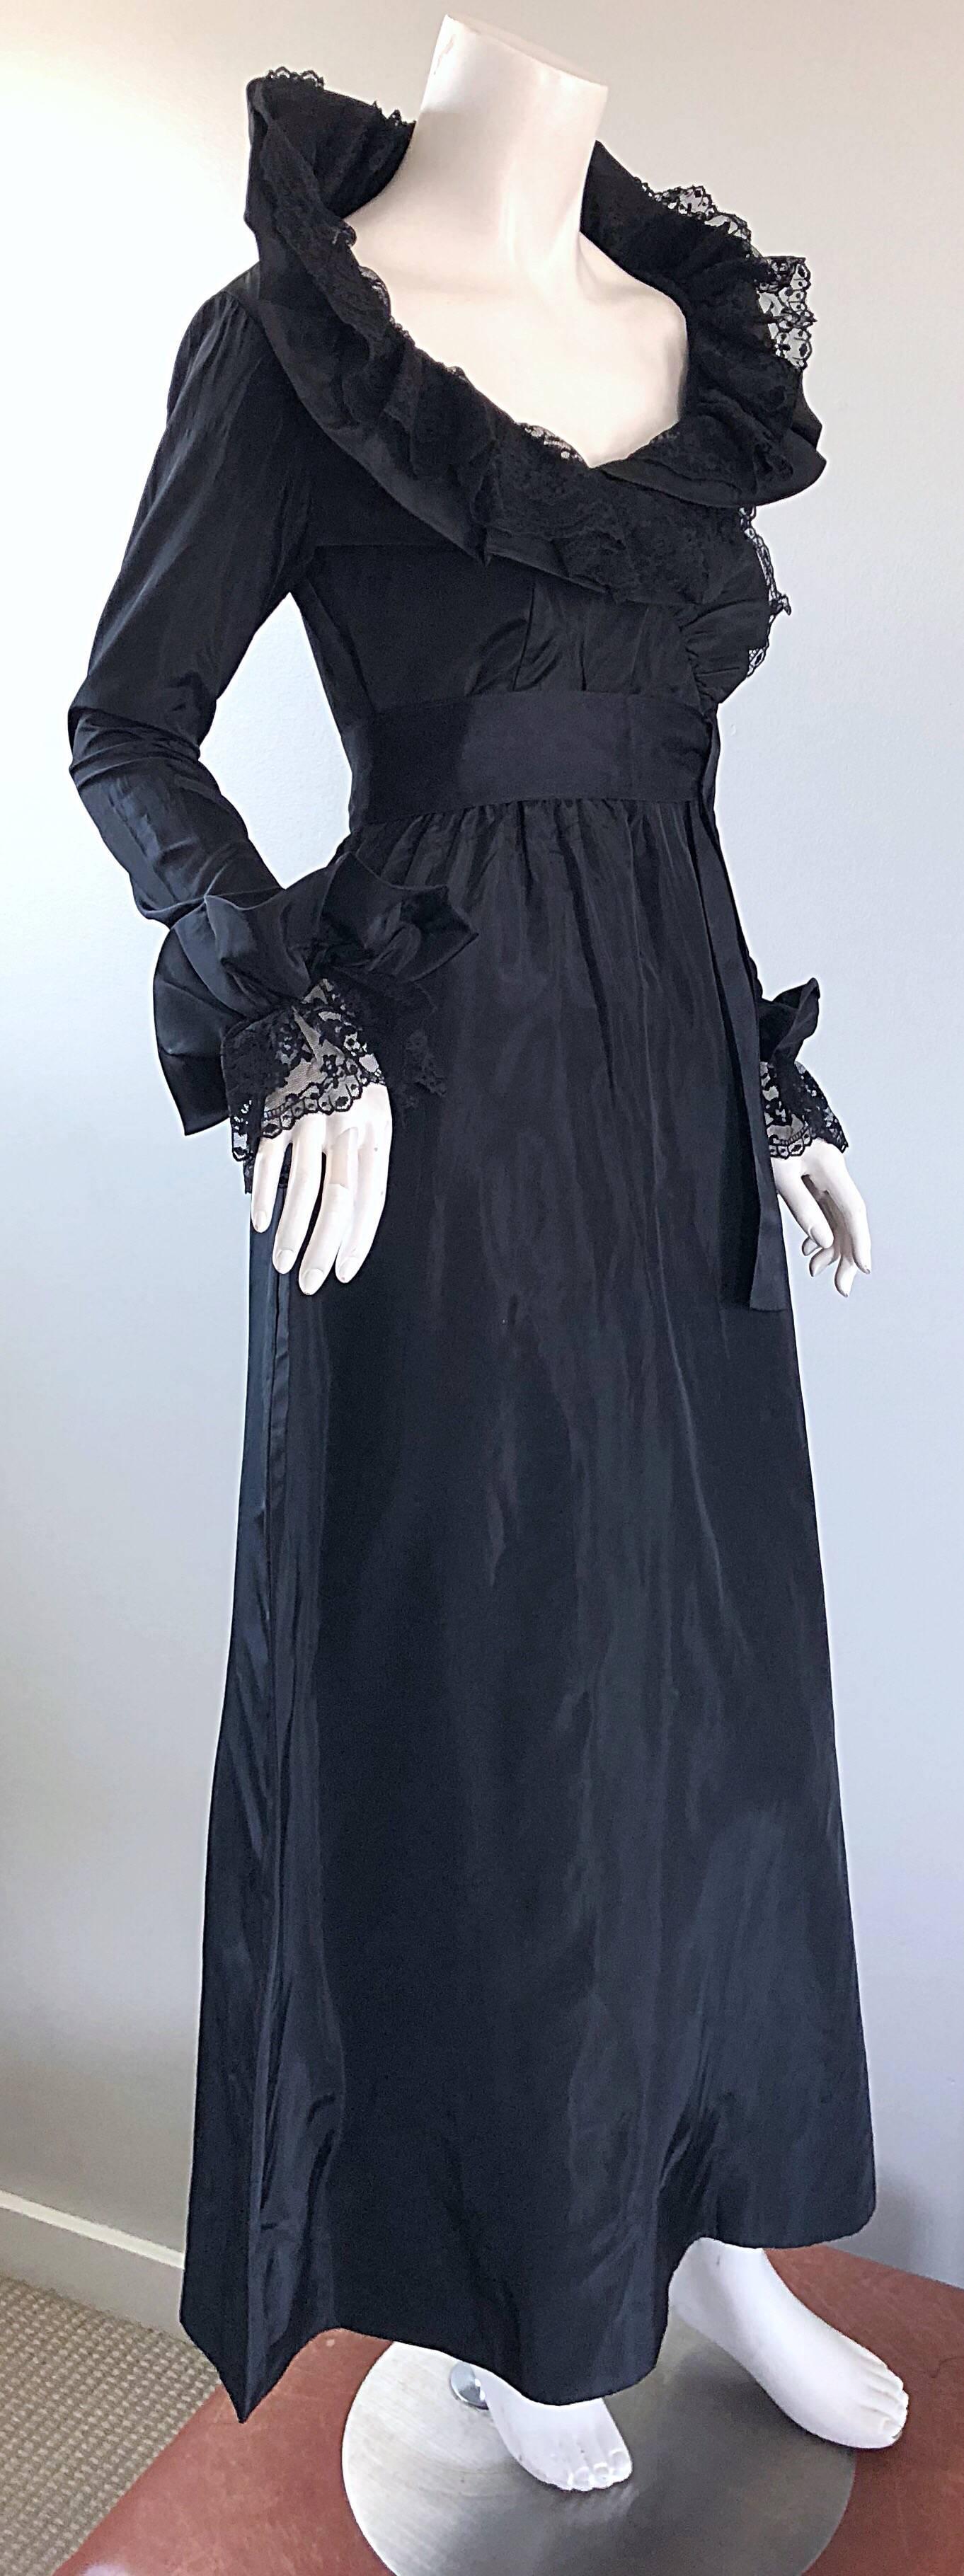 Beautiful Vintage Bill Blass Couture Silk Taffeta Lace Long Sleeve Evening Gown In Excellent Condition For Sale In San Diego, CA